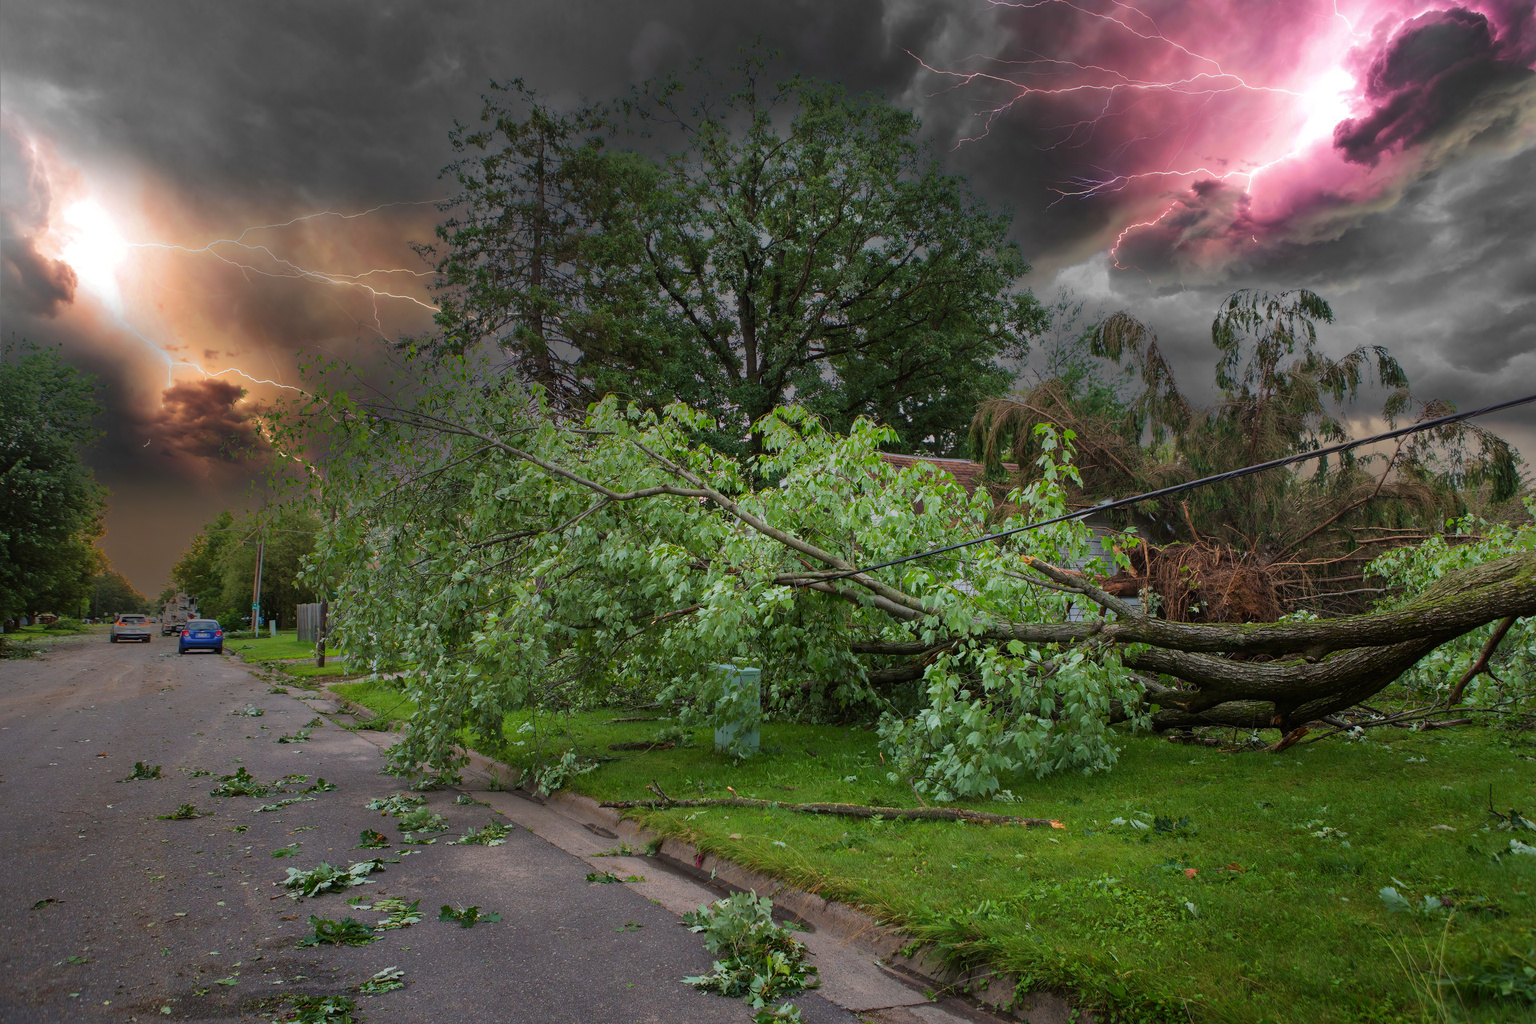 Tax relief for victims of Nebraska severe storms, straight-line winds, and tornadoes: IRA and HSA deadlines postponed